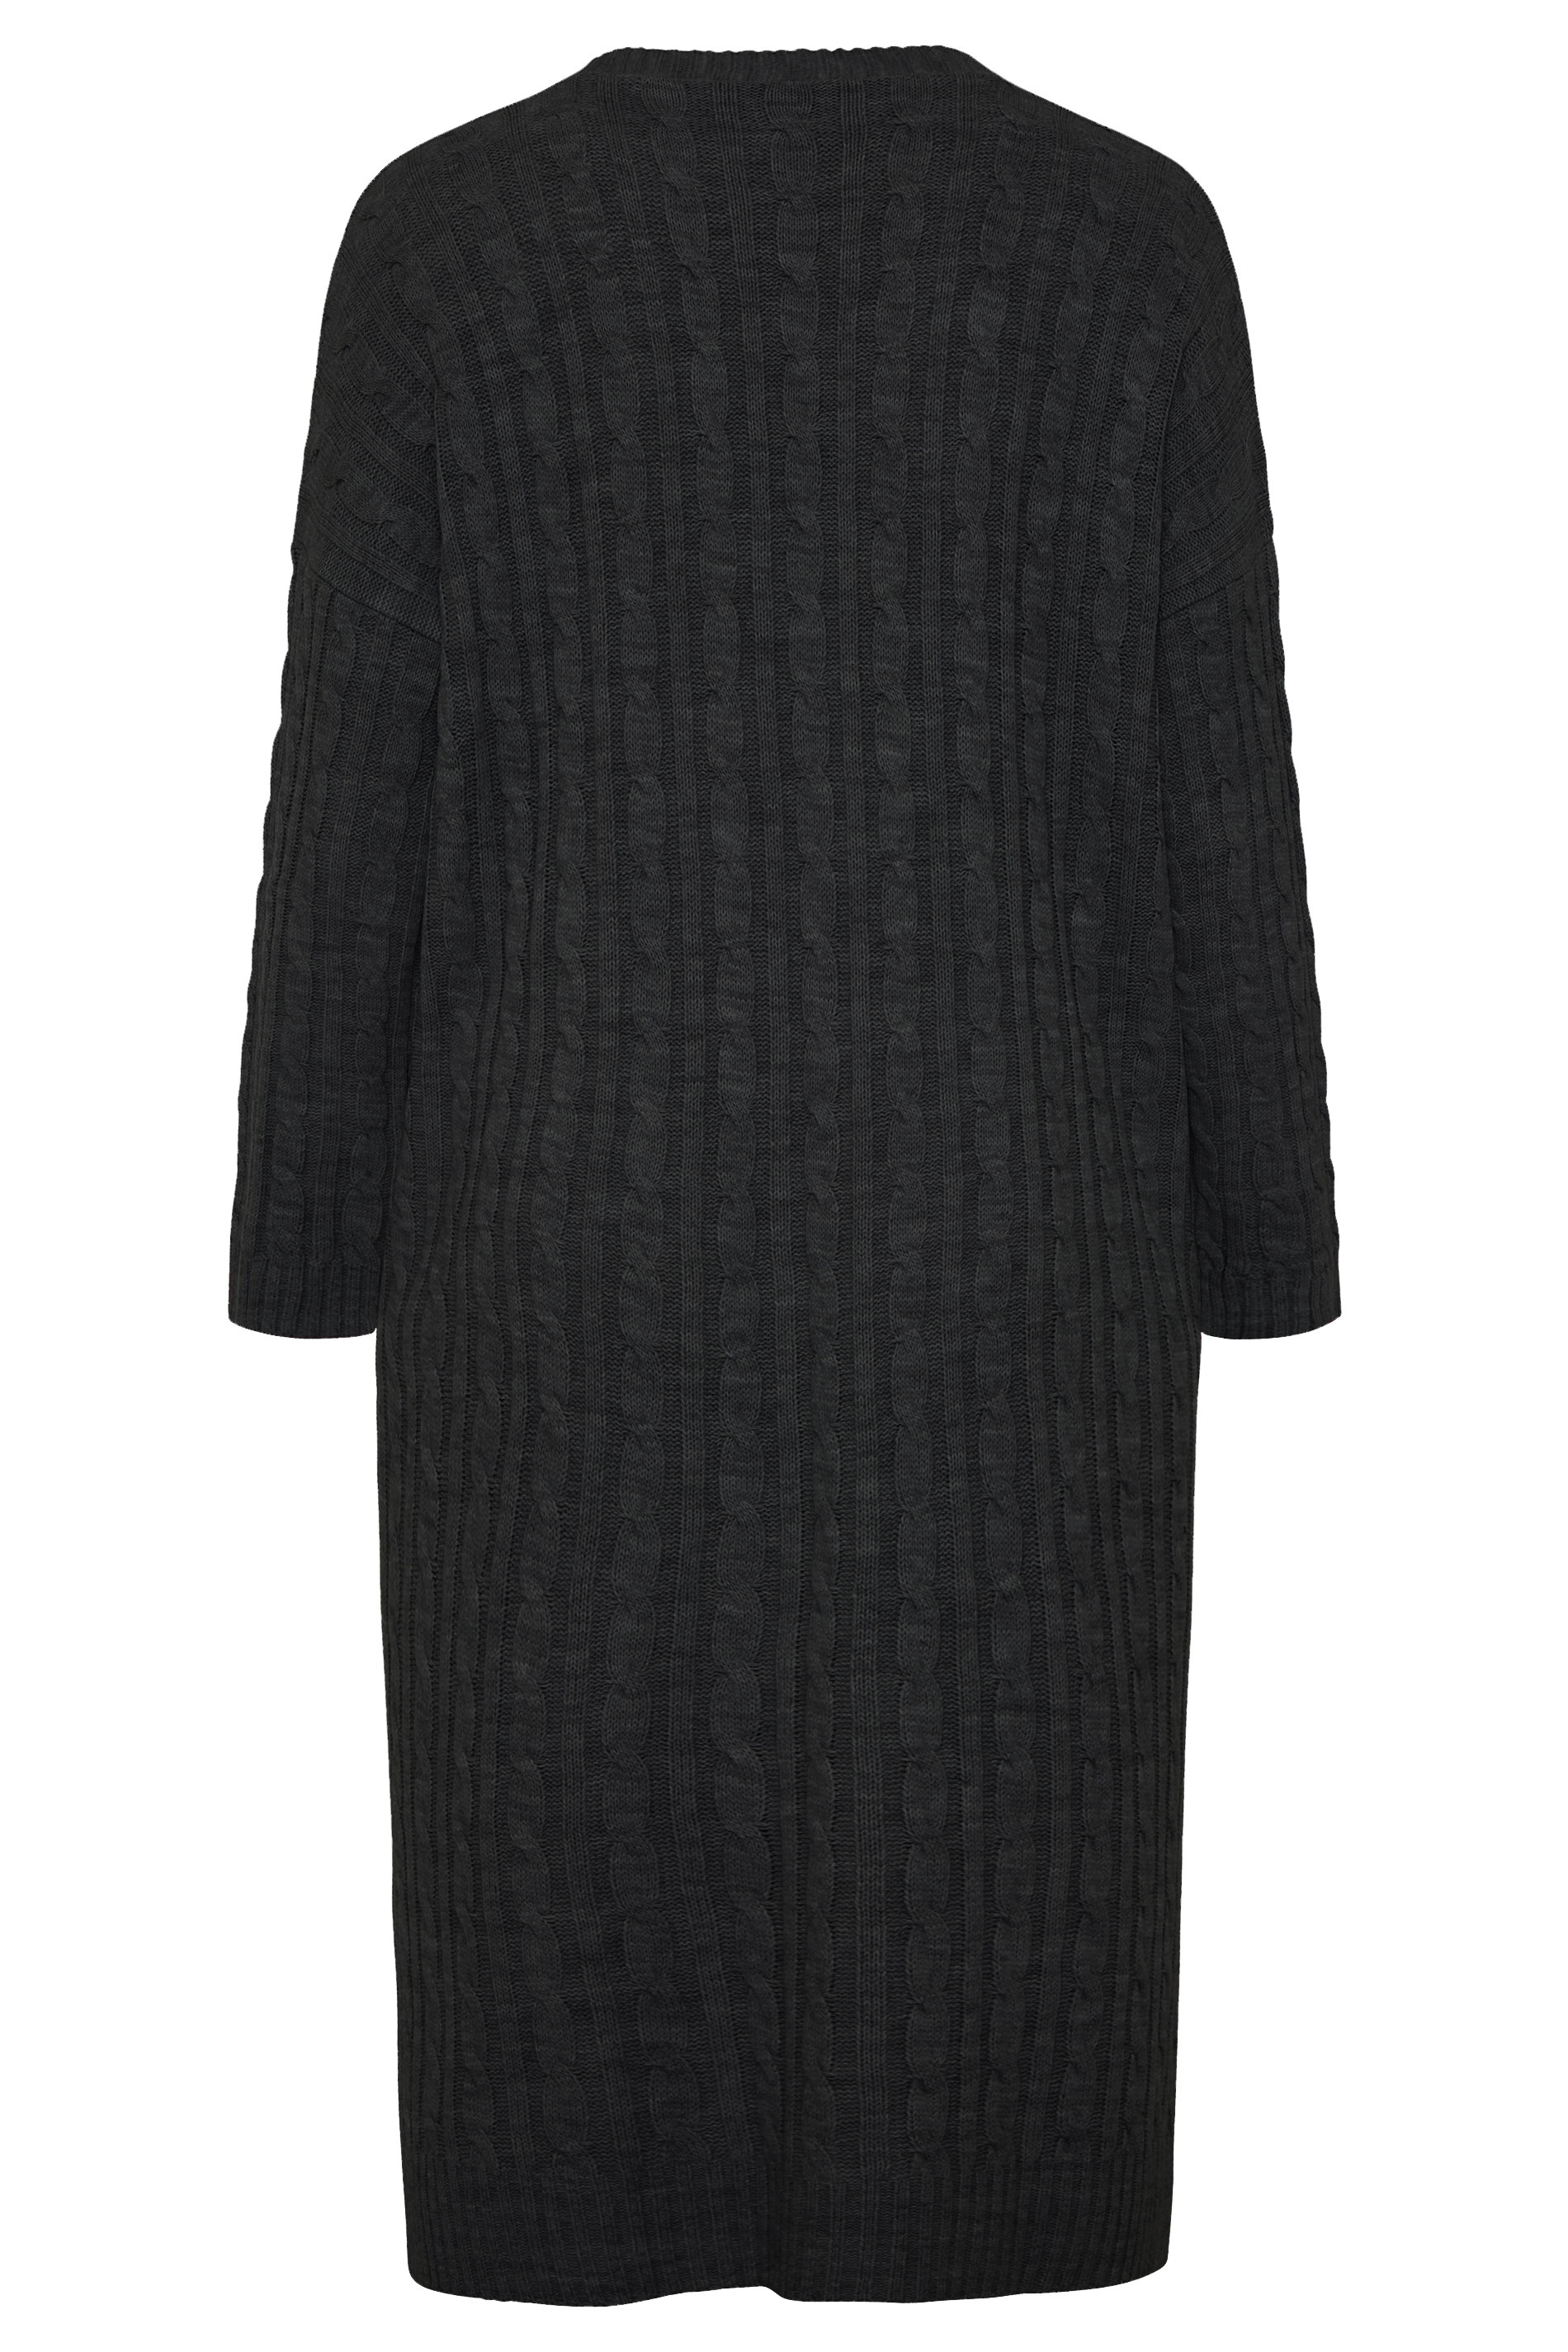 Black Cable Knit Longline Cardigan | Yours Clothing